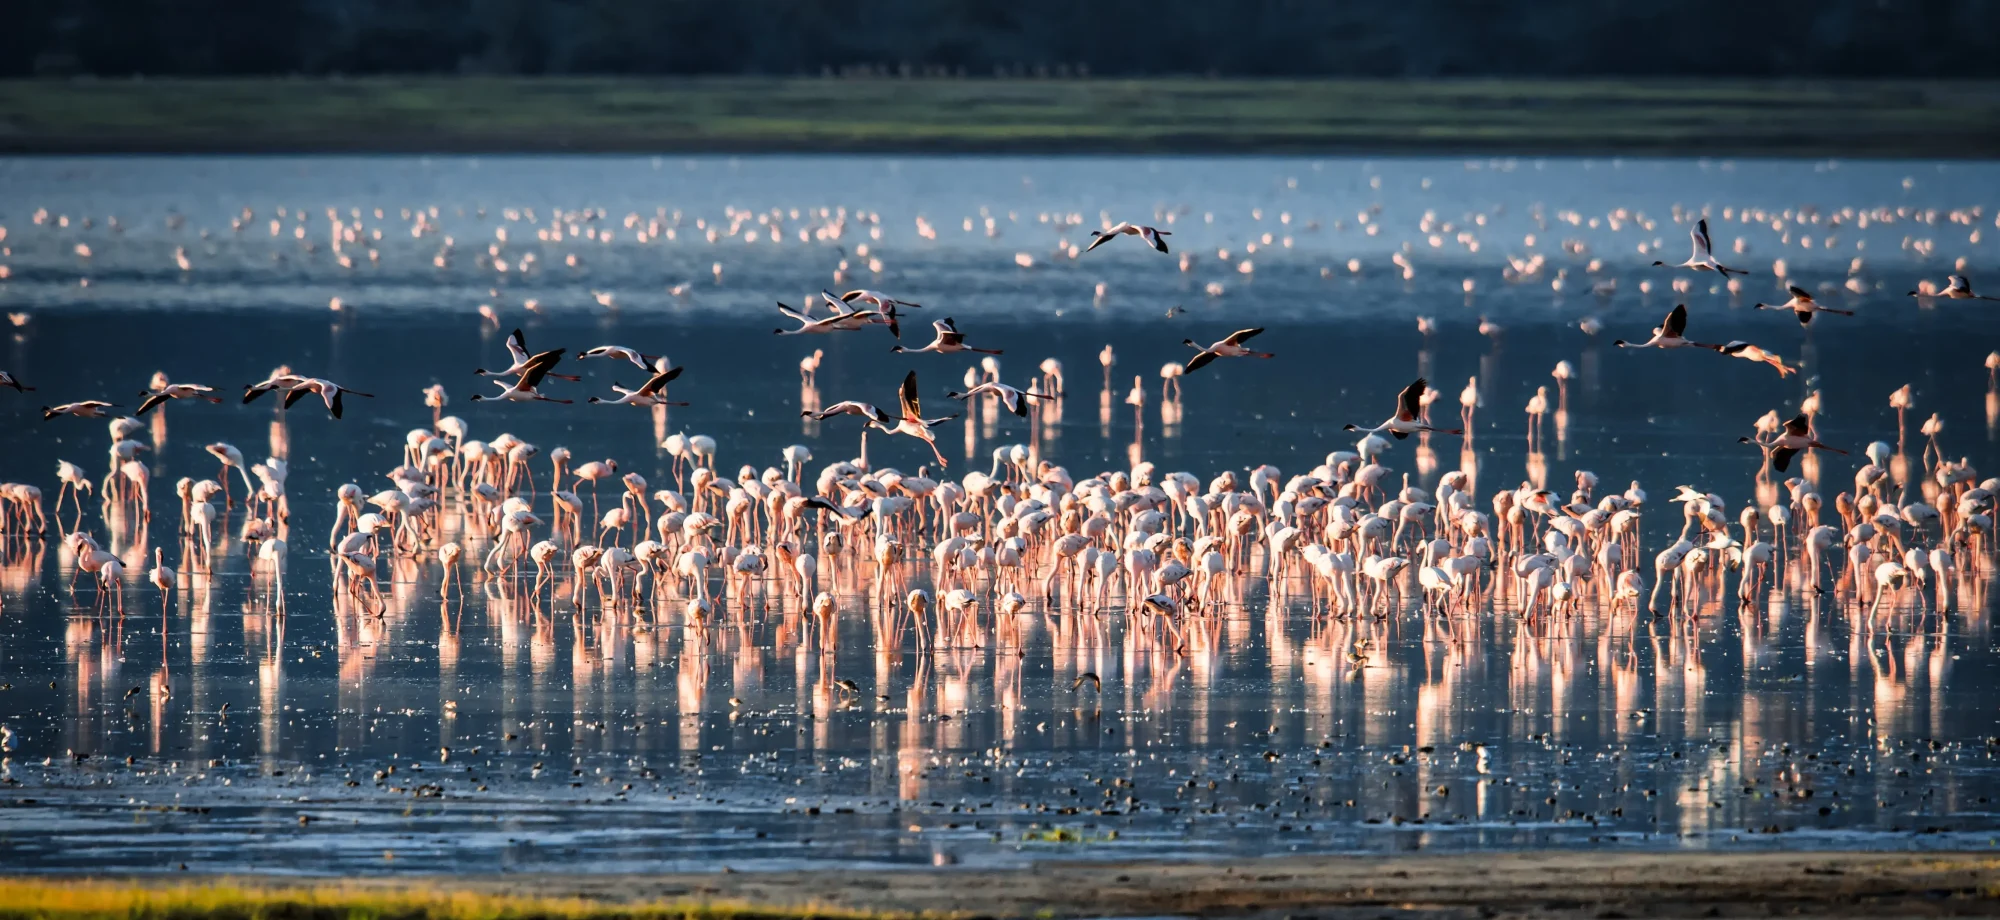 A large flock of pink flamingos drink from Lake Manyara, accompanied by a variation of other aquatic birds.